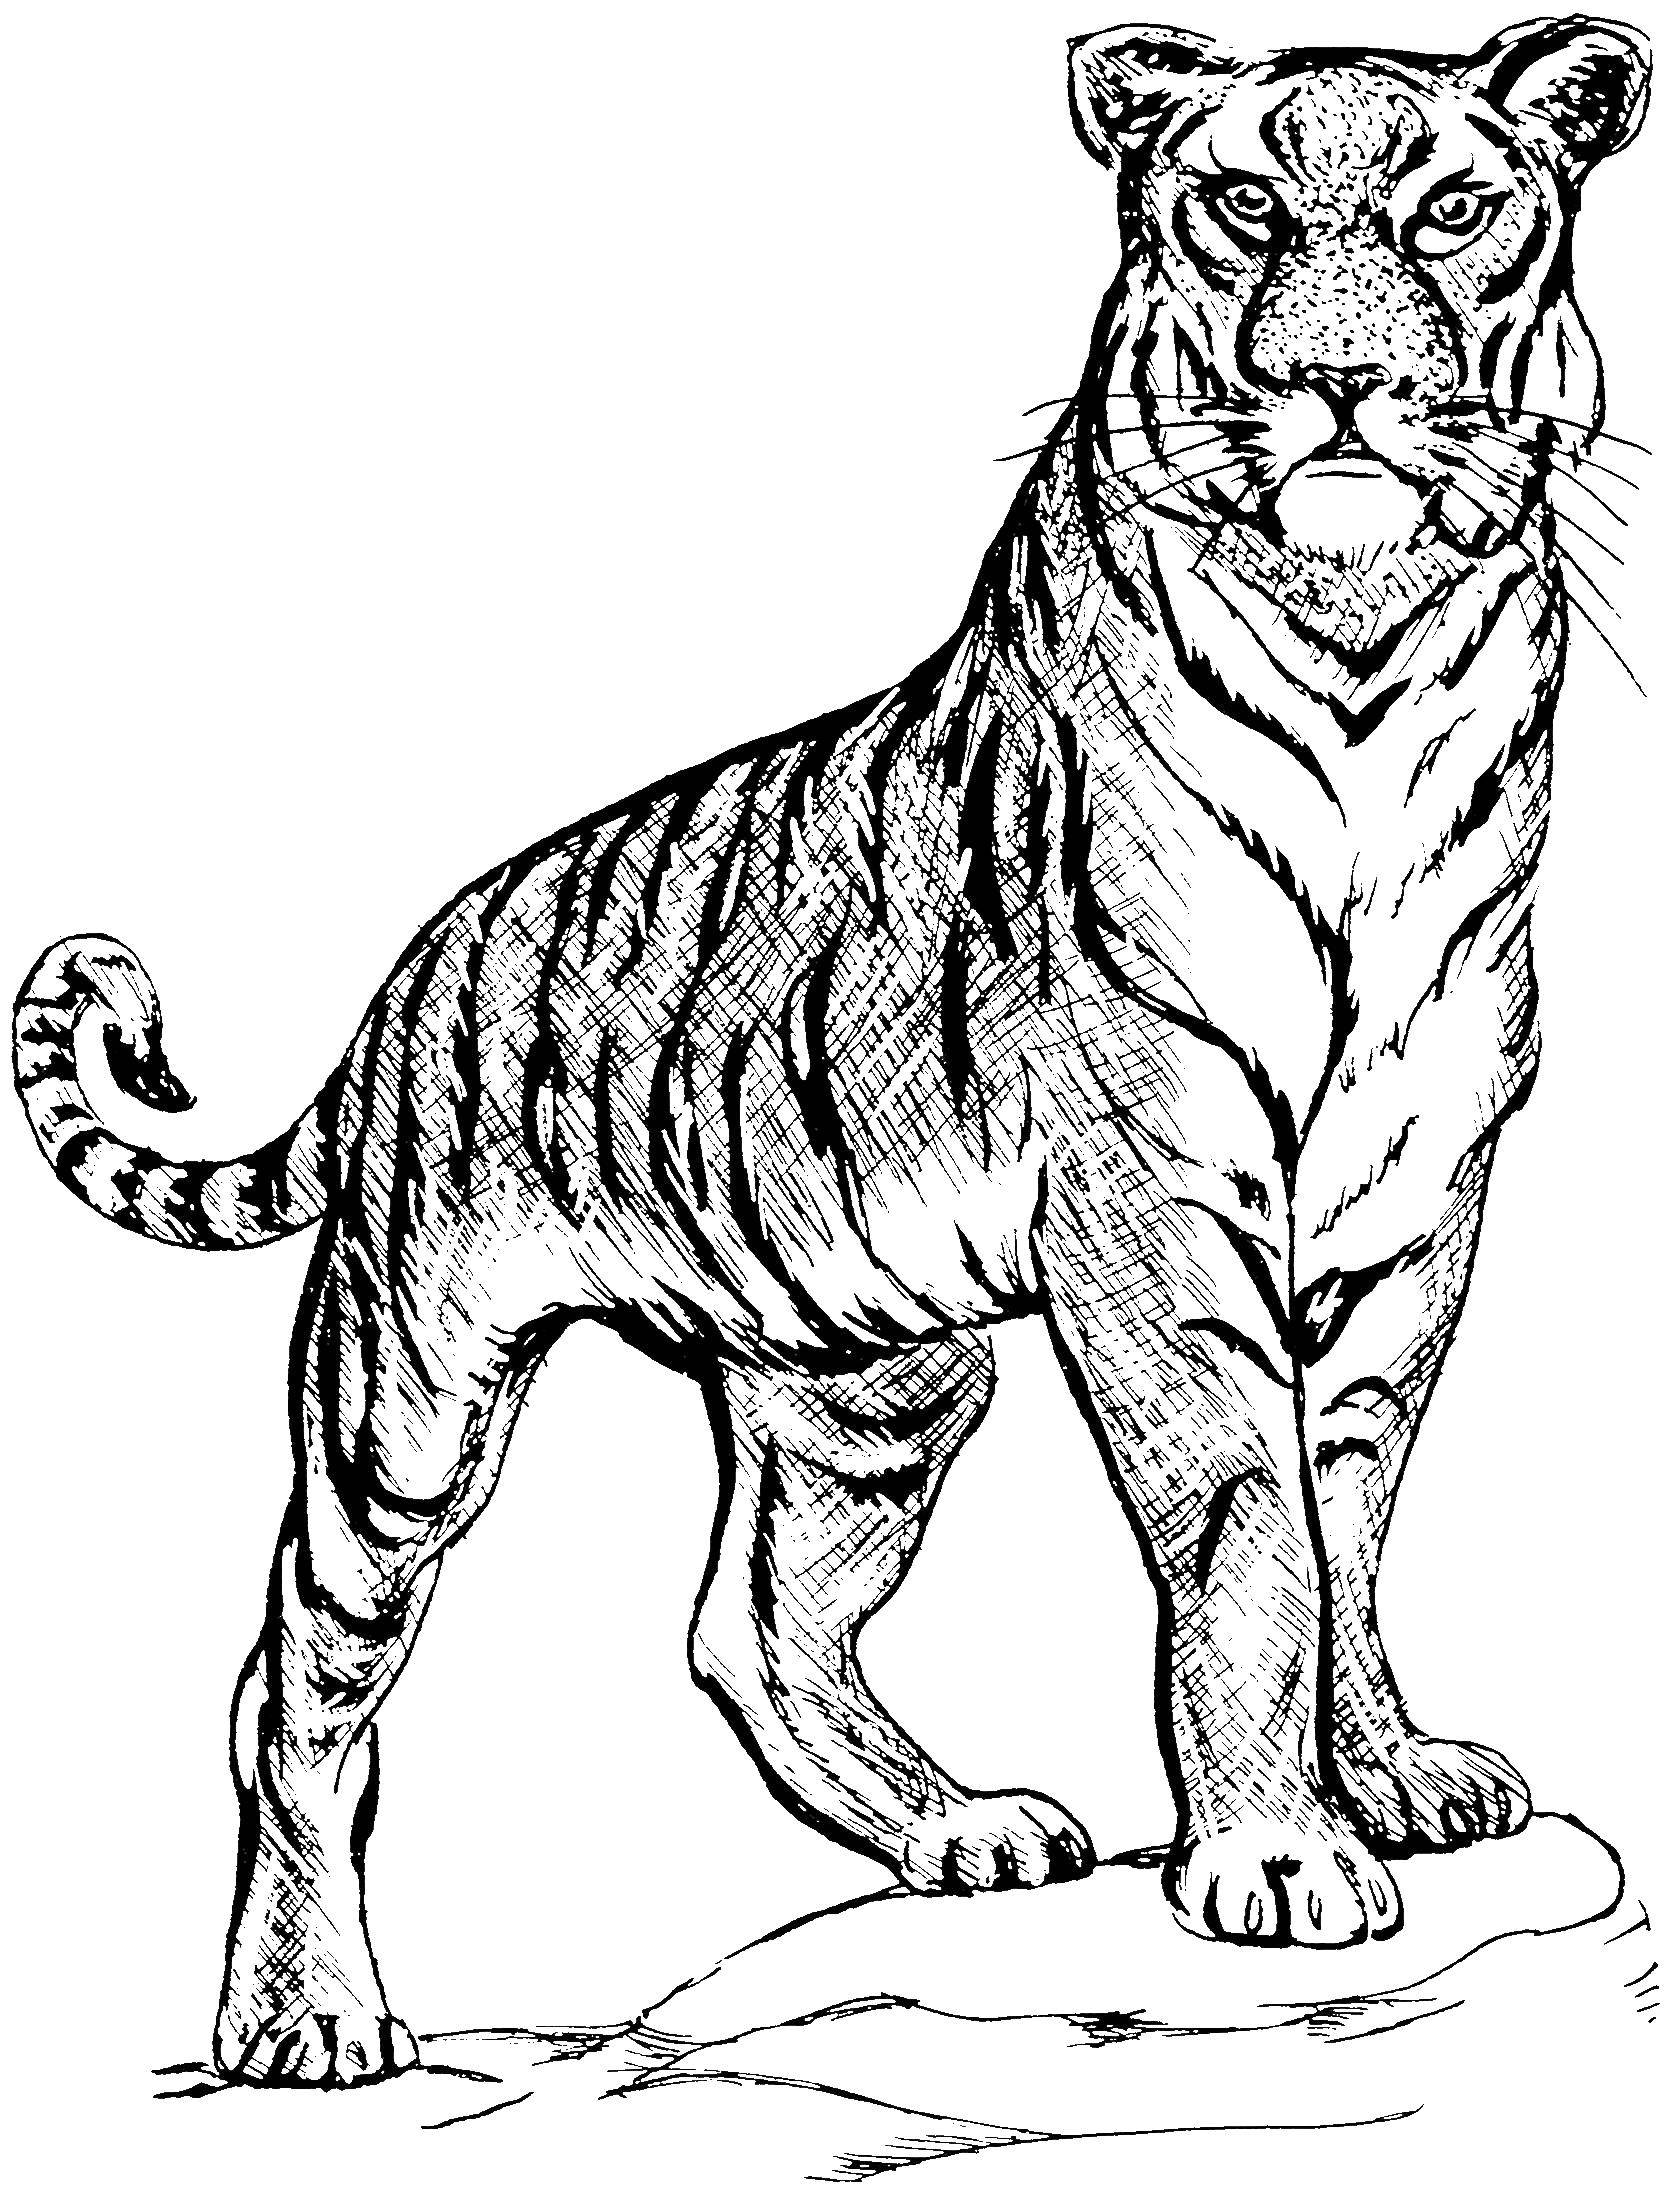 Coloring The tiger - hunter. Category wild animals. Tags:  Animals, tiger.